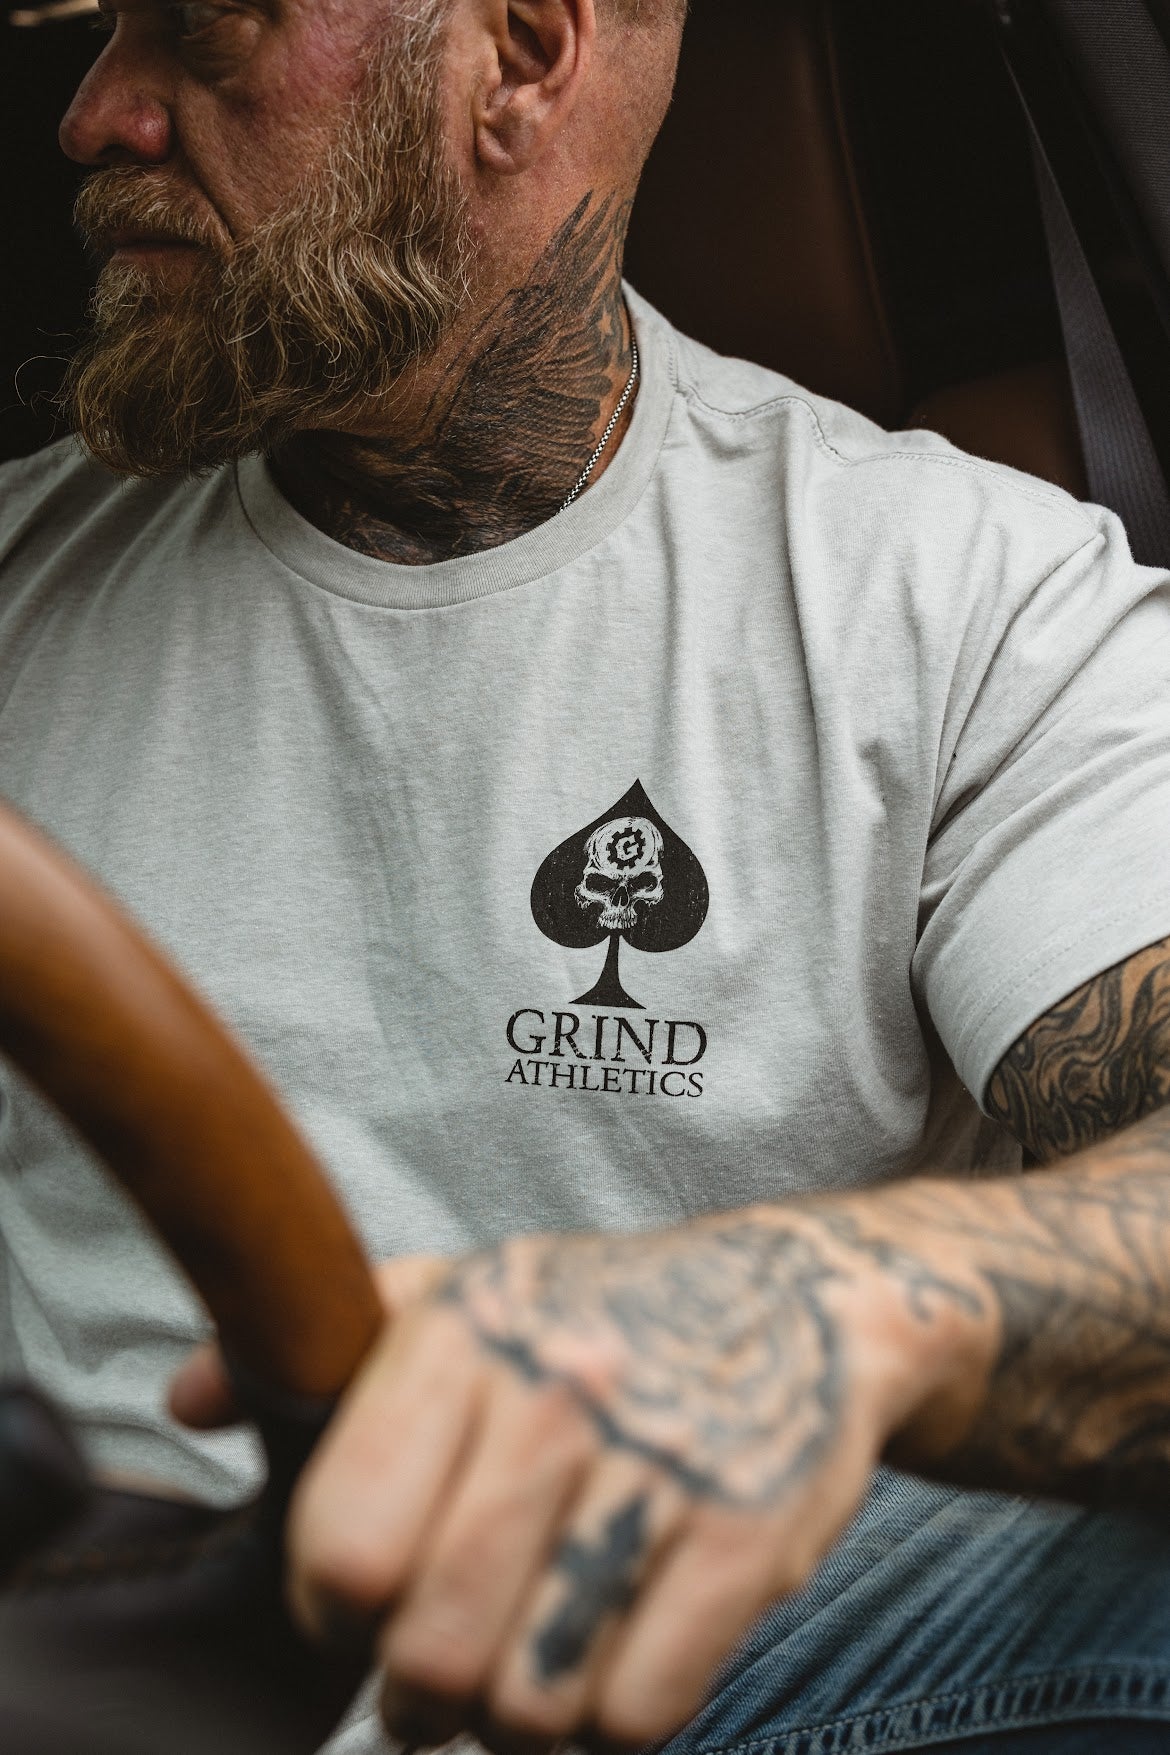 The Grind Athletics Fortune Favors The Bold